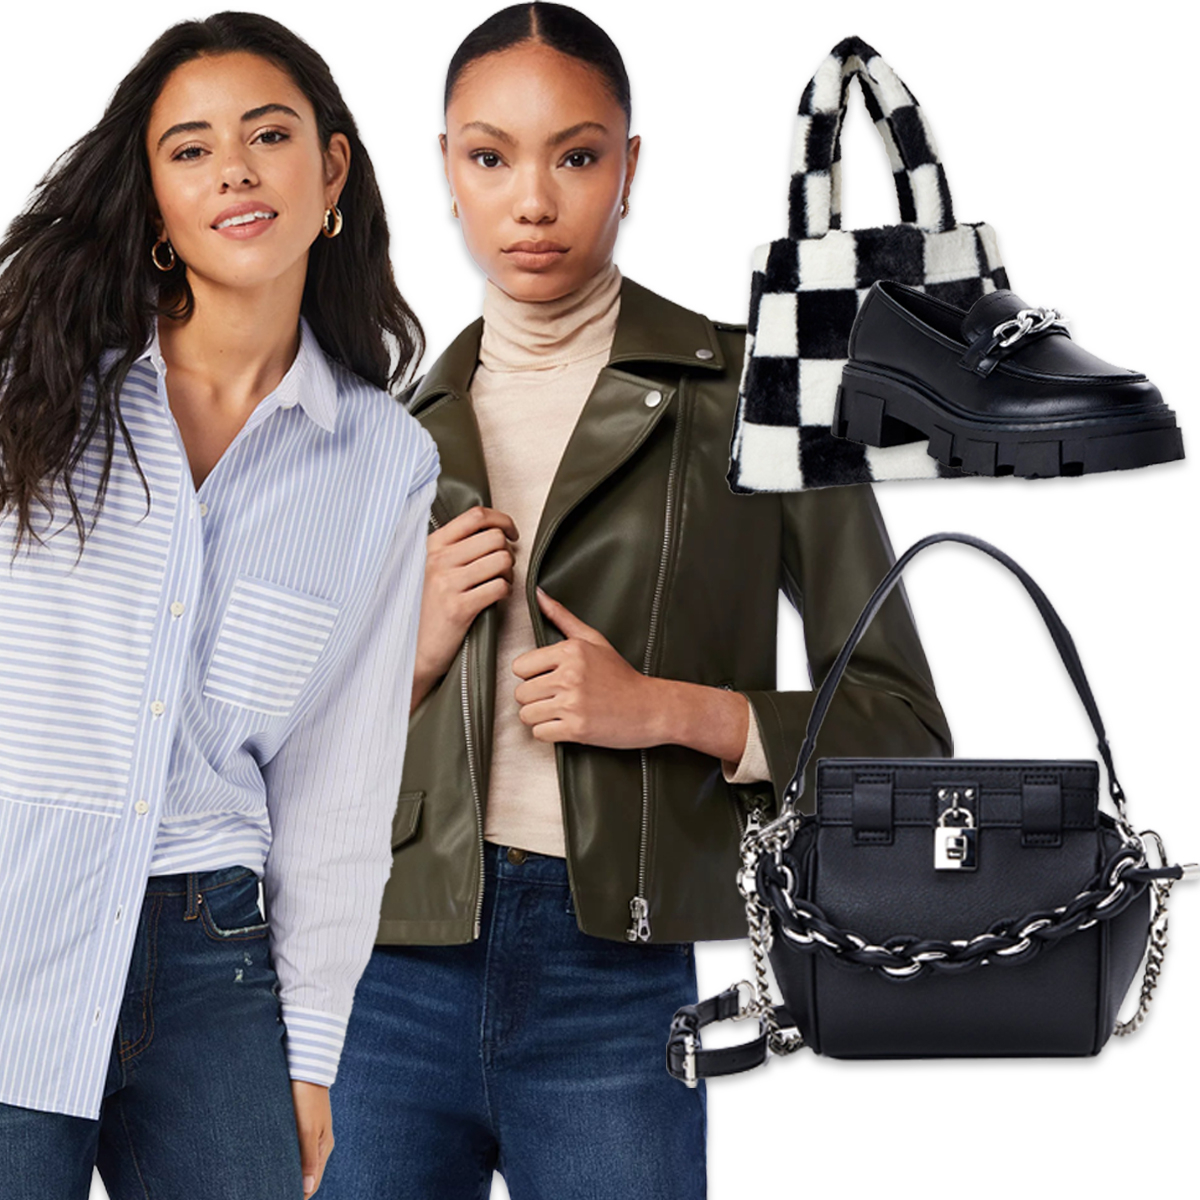 Every Surprisingly Stylish Find From Walmart Our Shopping Editors Would Buy With $30 – E! Online